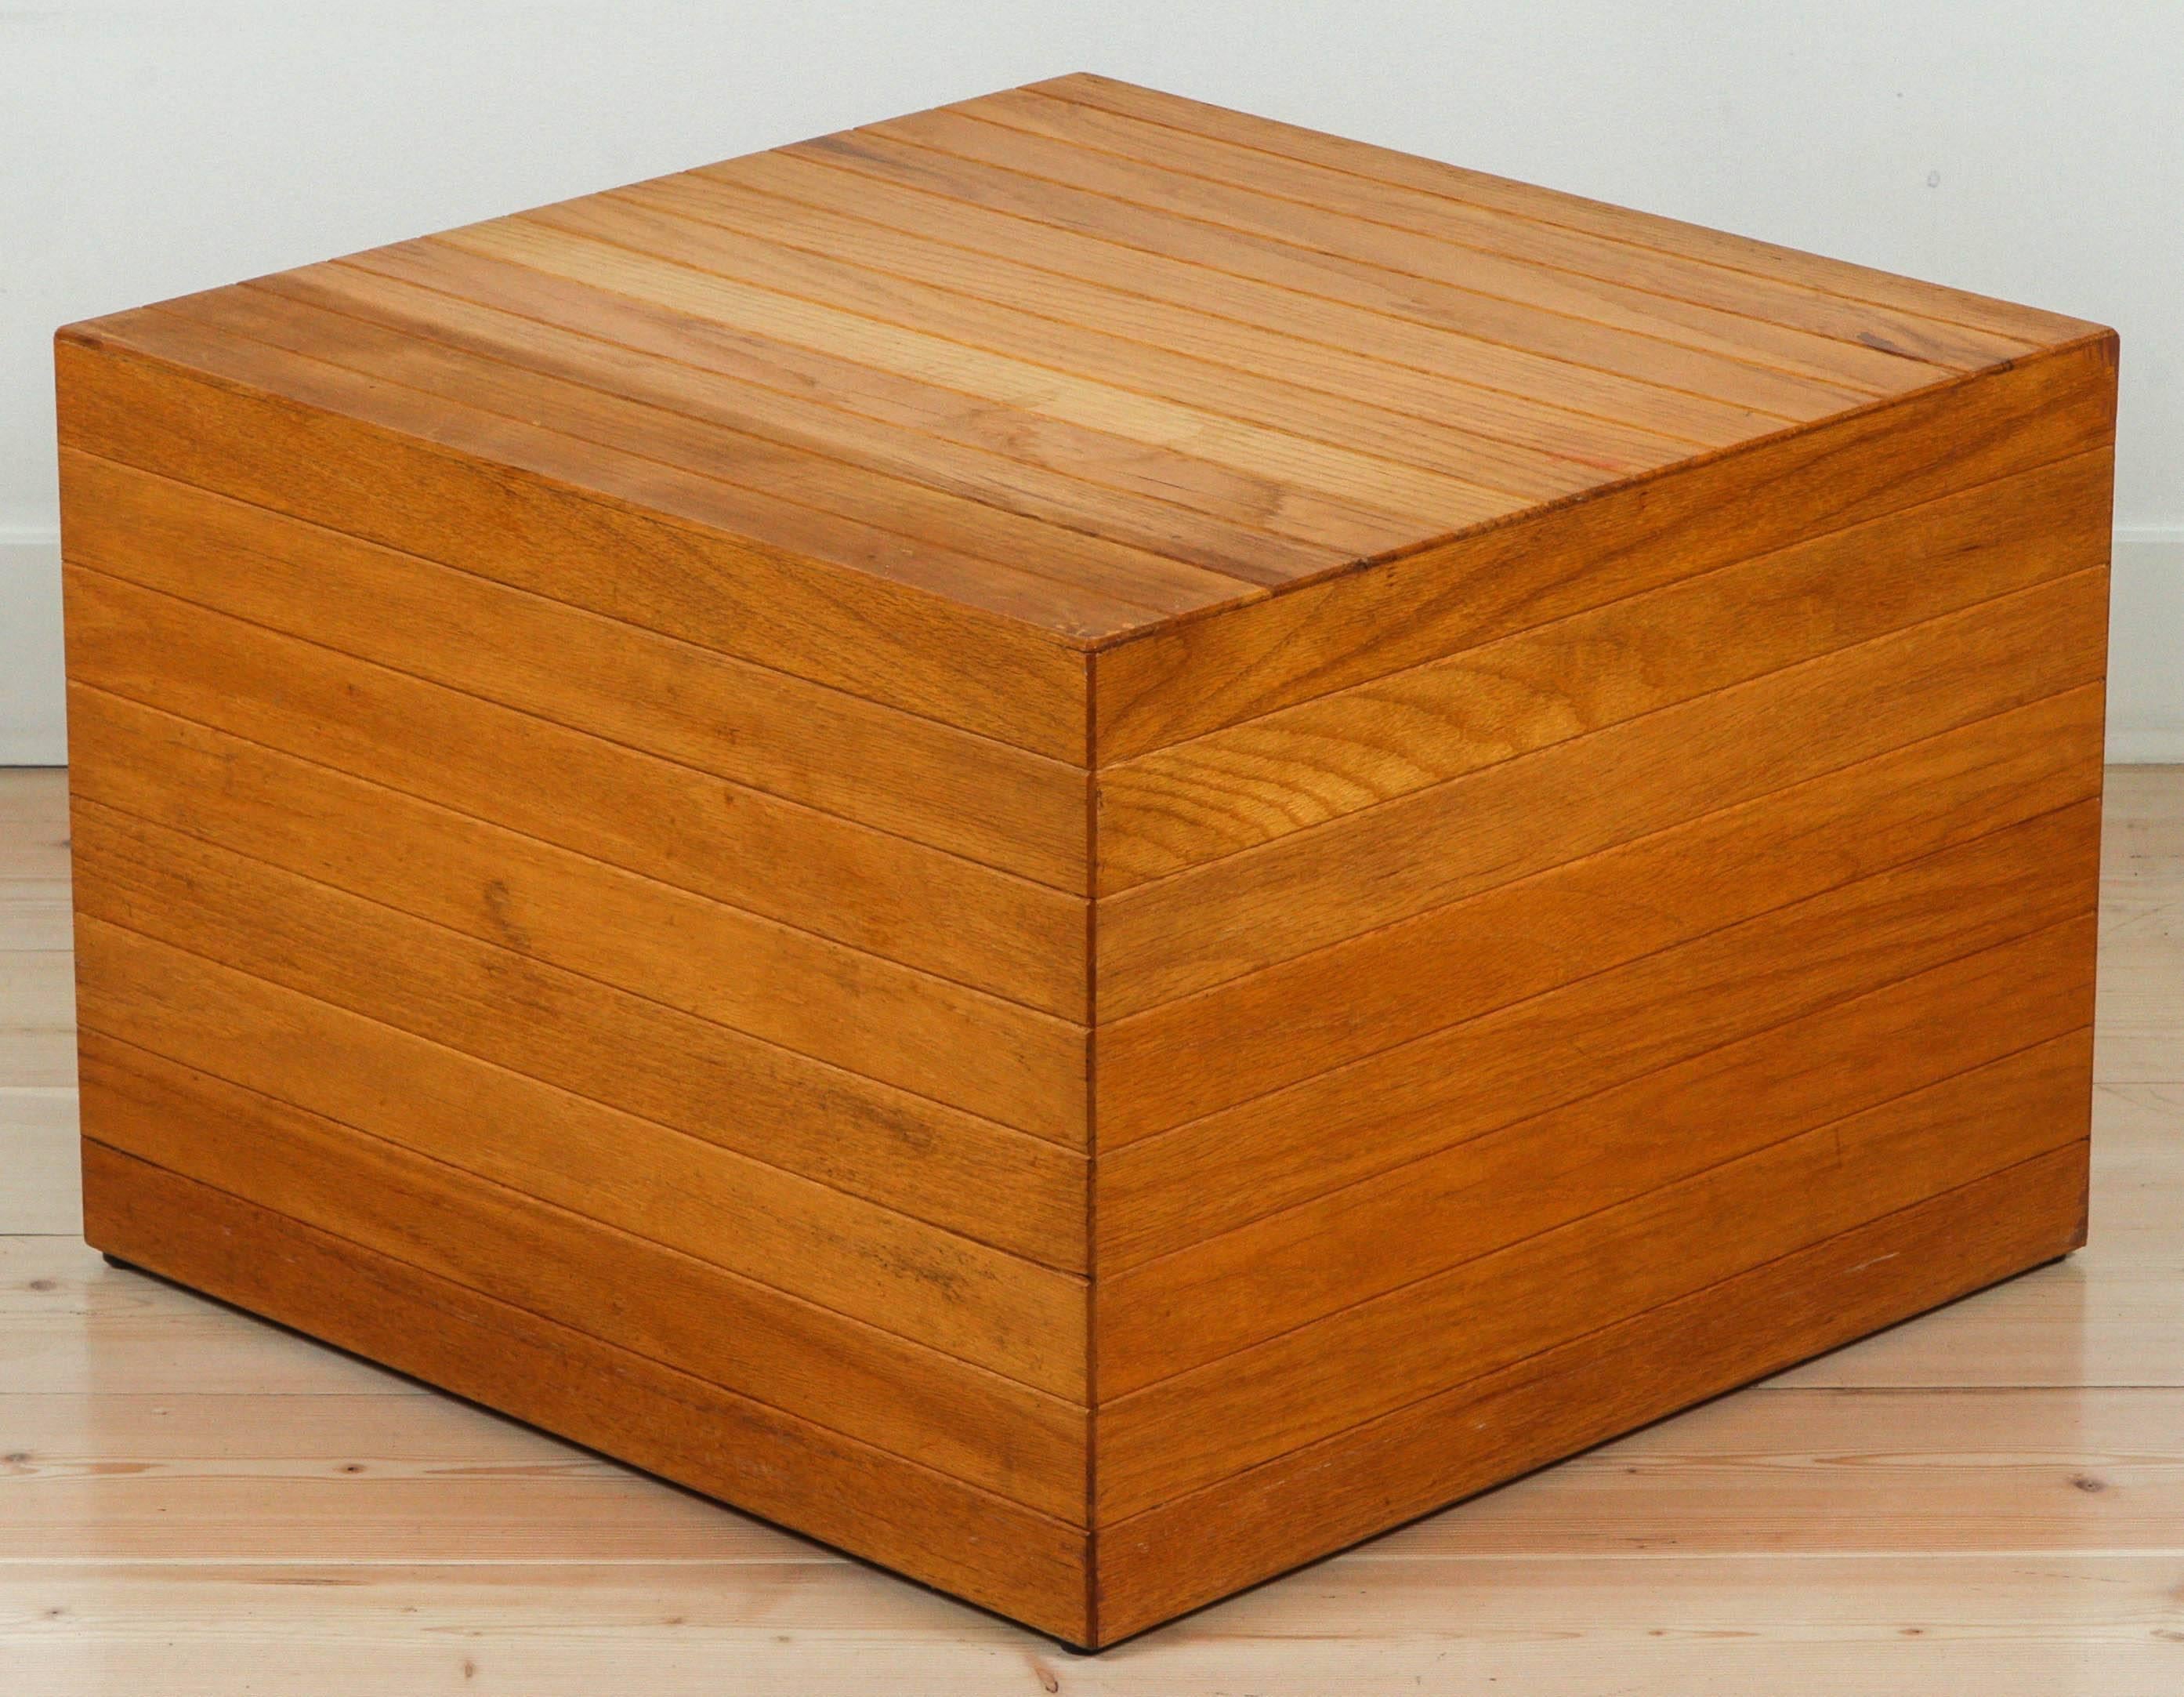 Custom oak cube table by forms and surfaces.